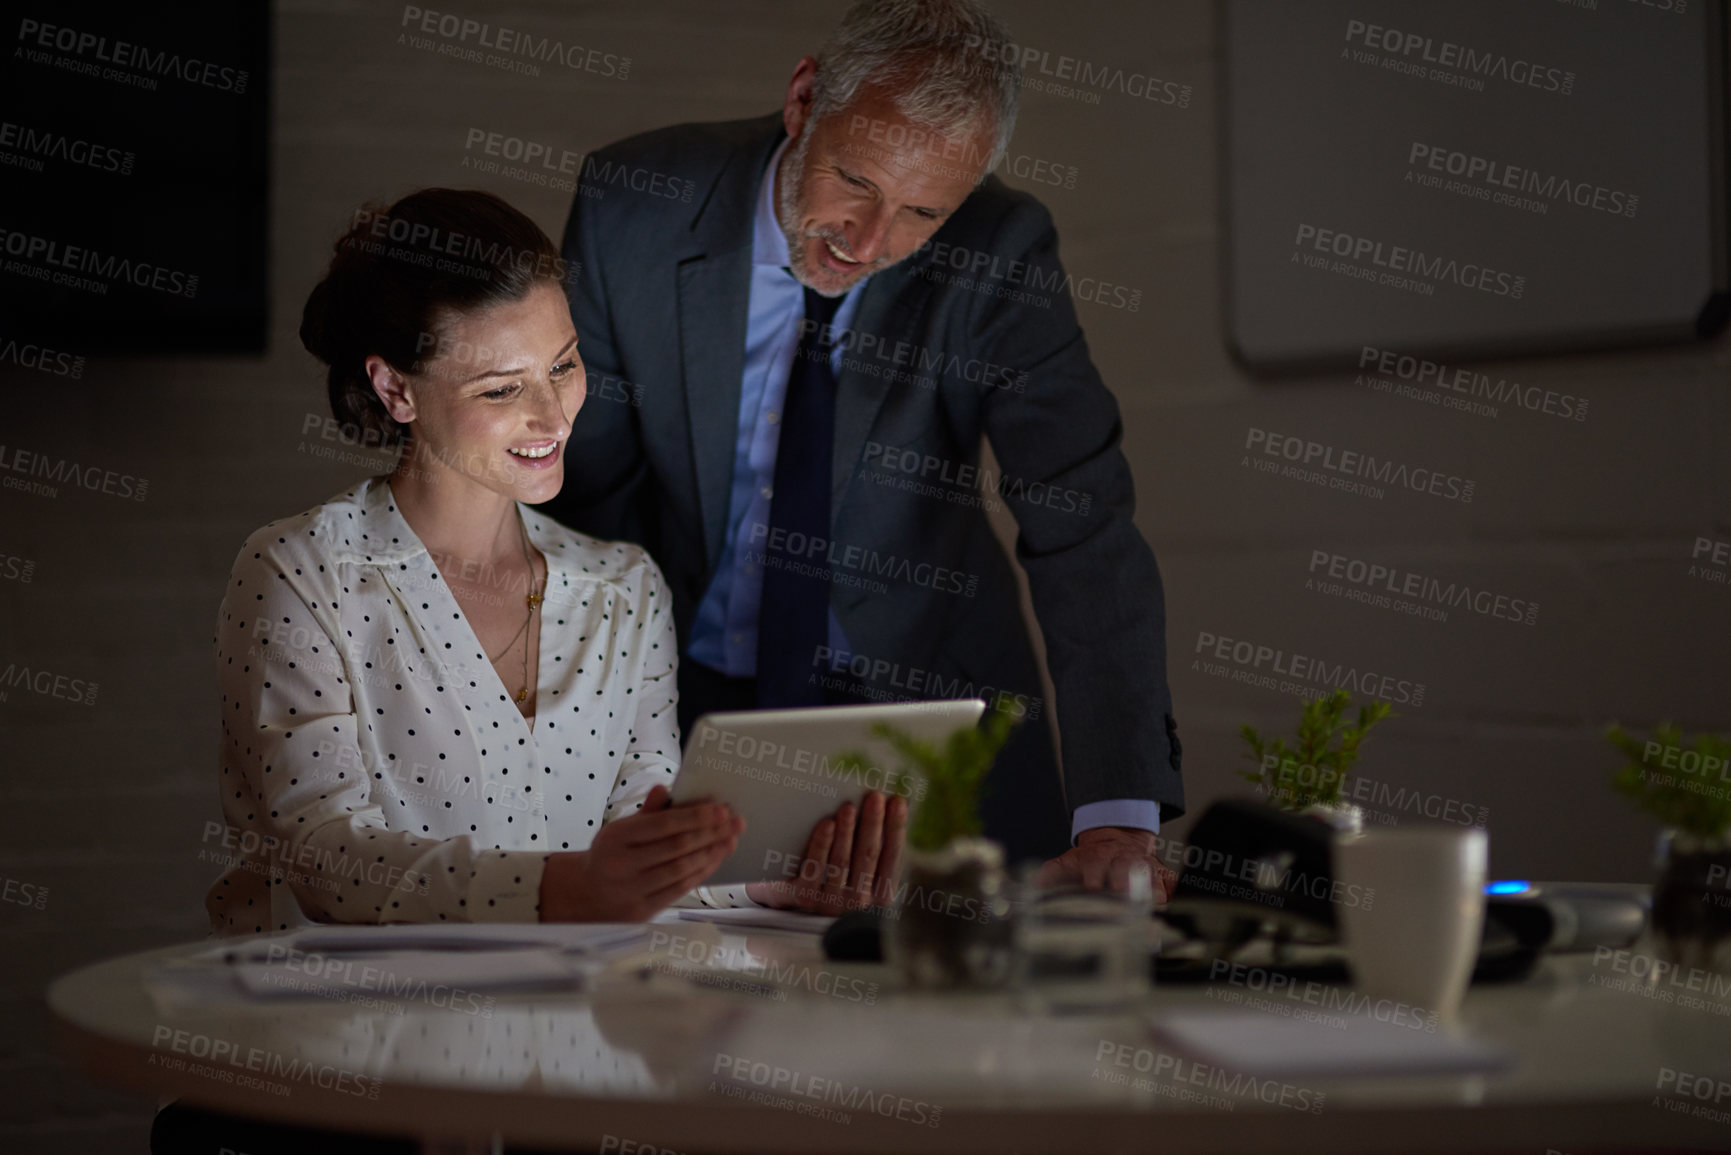 Buy stock photo Shot of two colleagues using a digital tablet while working late in an office